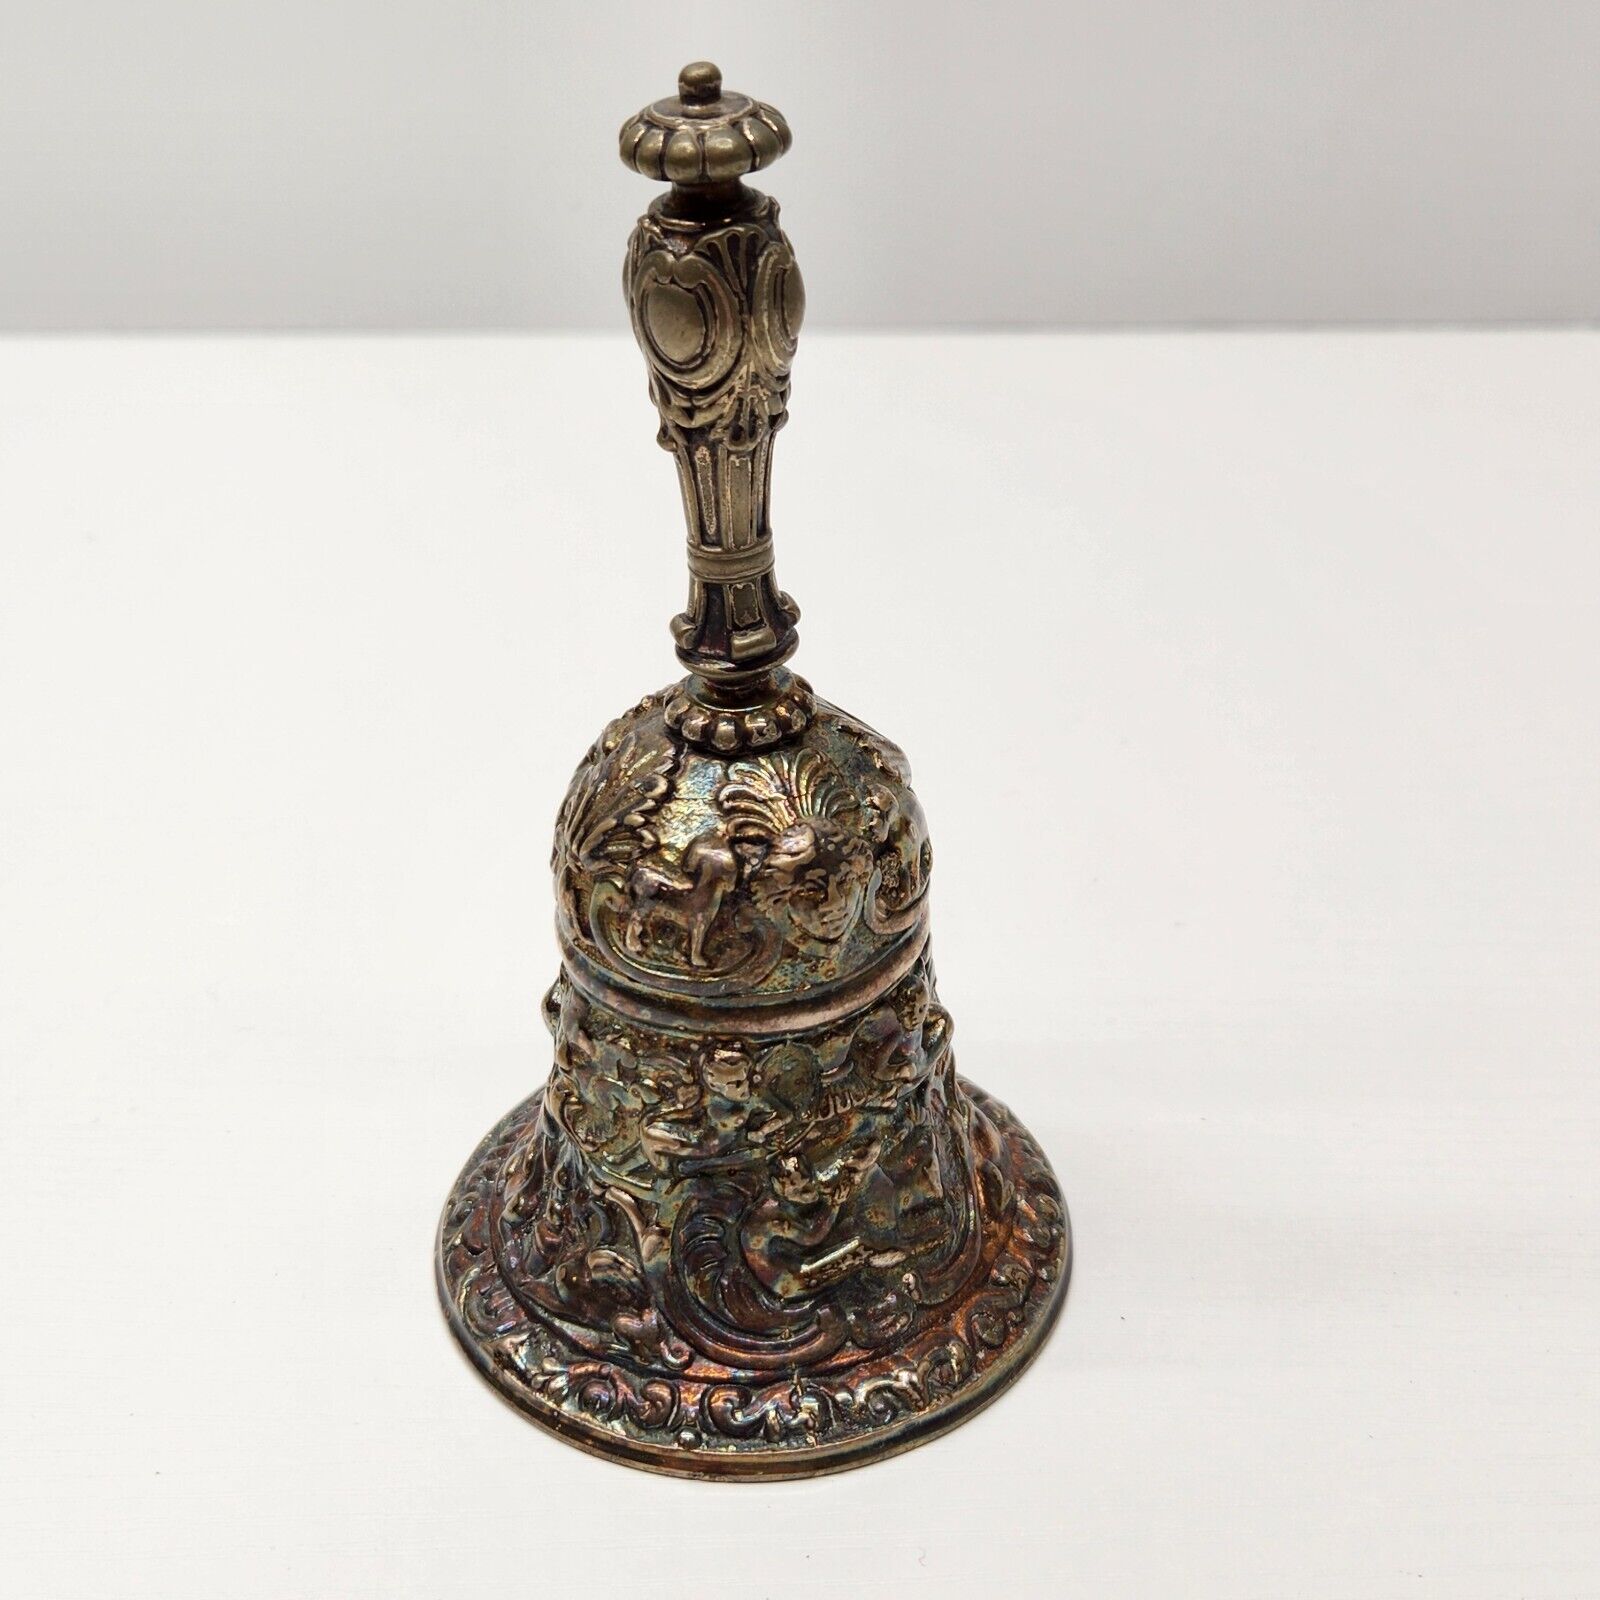 RARE Antique Old Florentine Bell by Gorham Co. Silverplated Bronze 015 Vintage